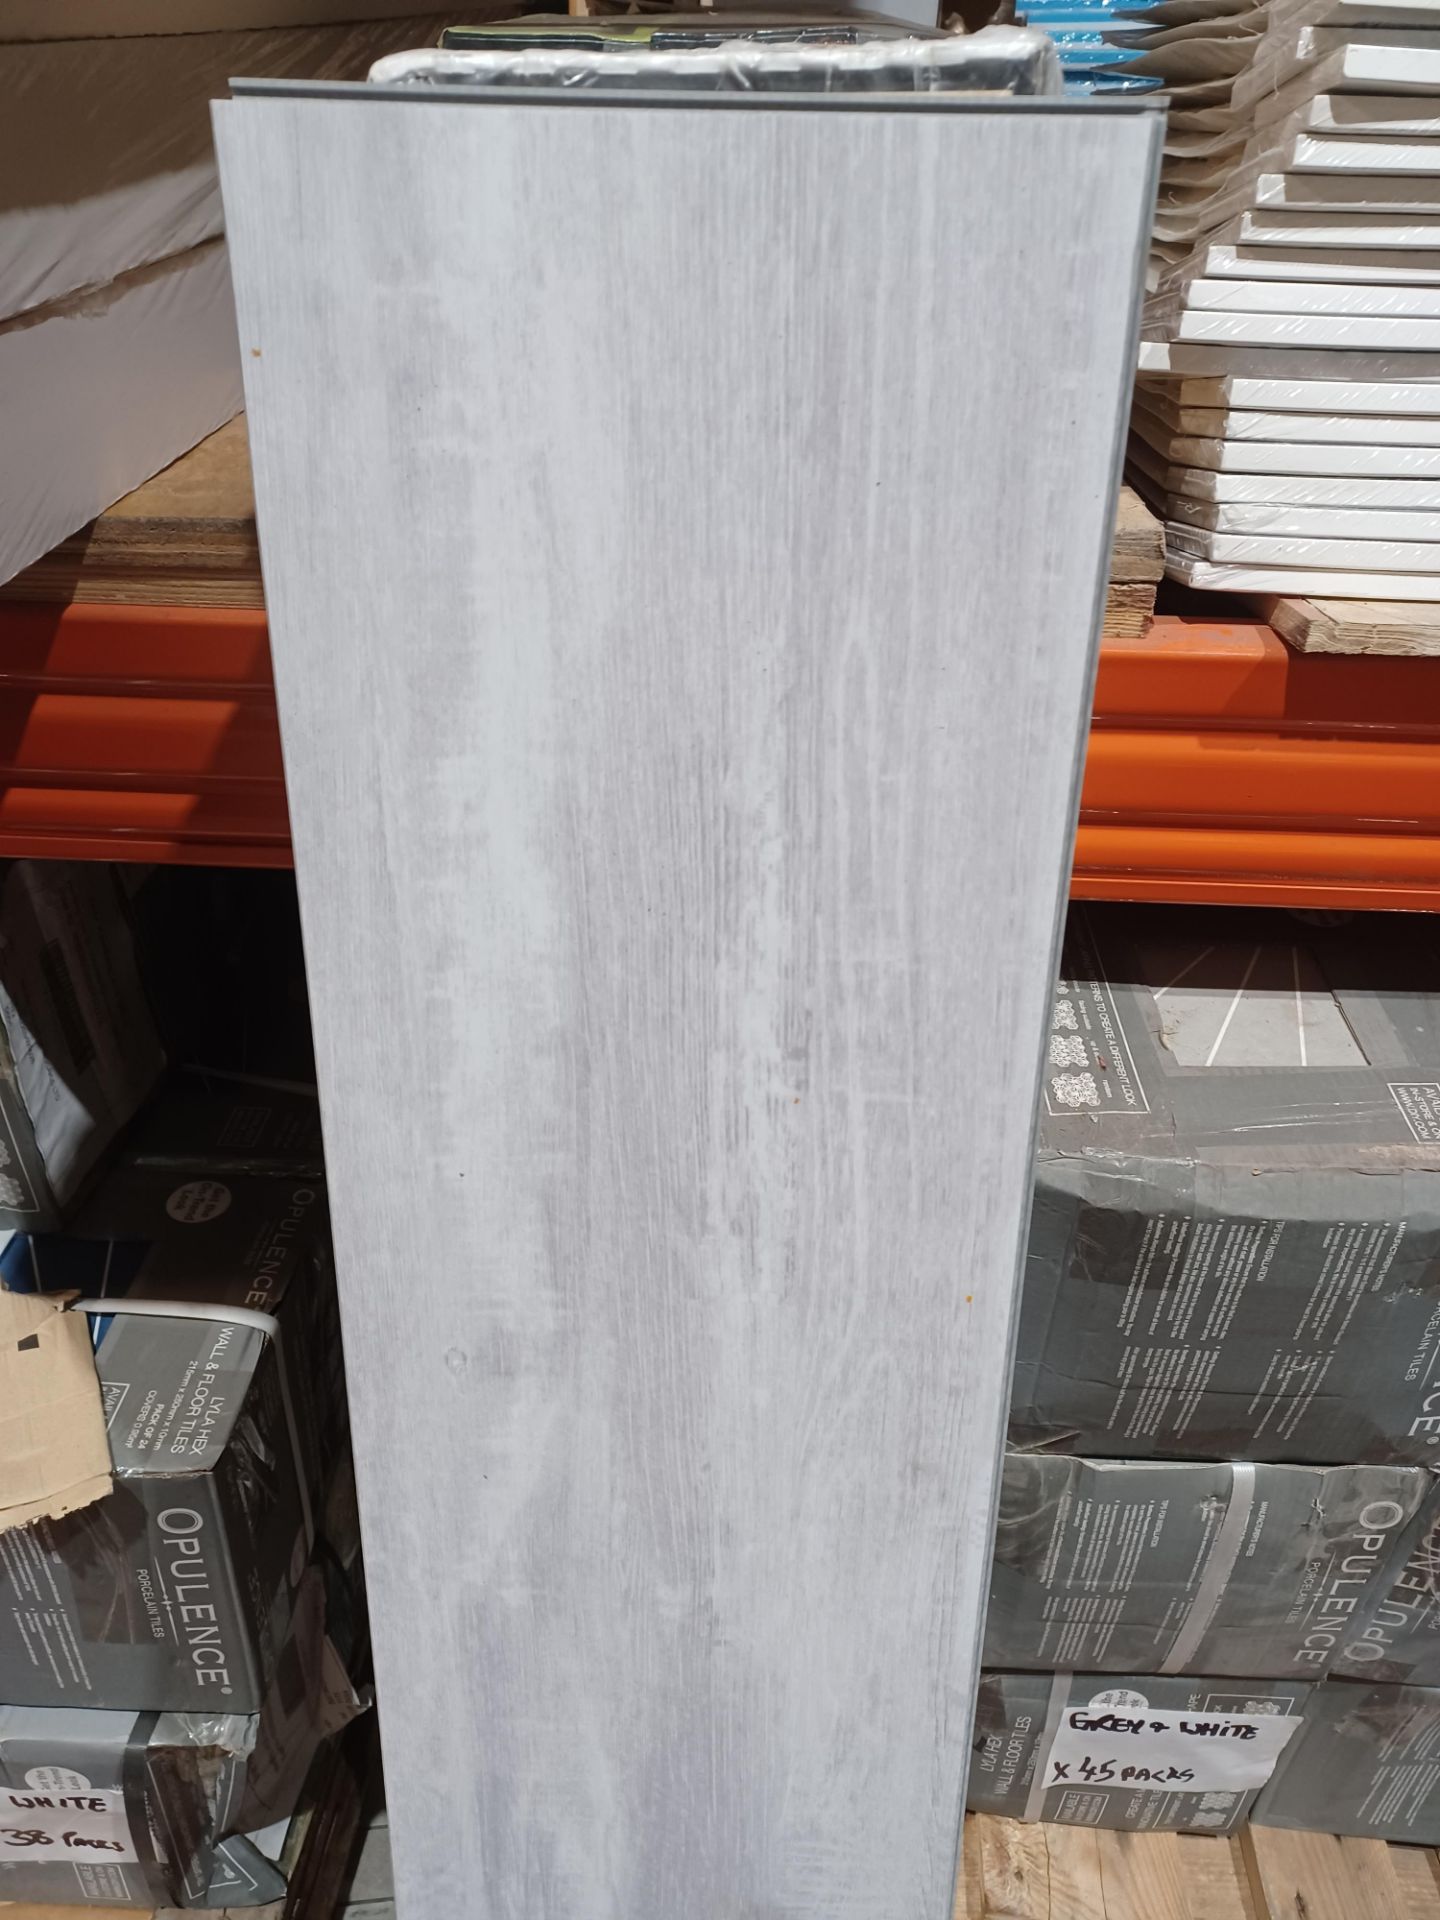 5 x Packs of Concerto Vinyl Click Plank Contains 8 x Planks. - R14 - Image 2 of 2